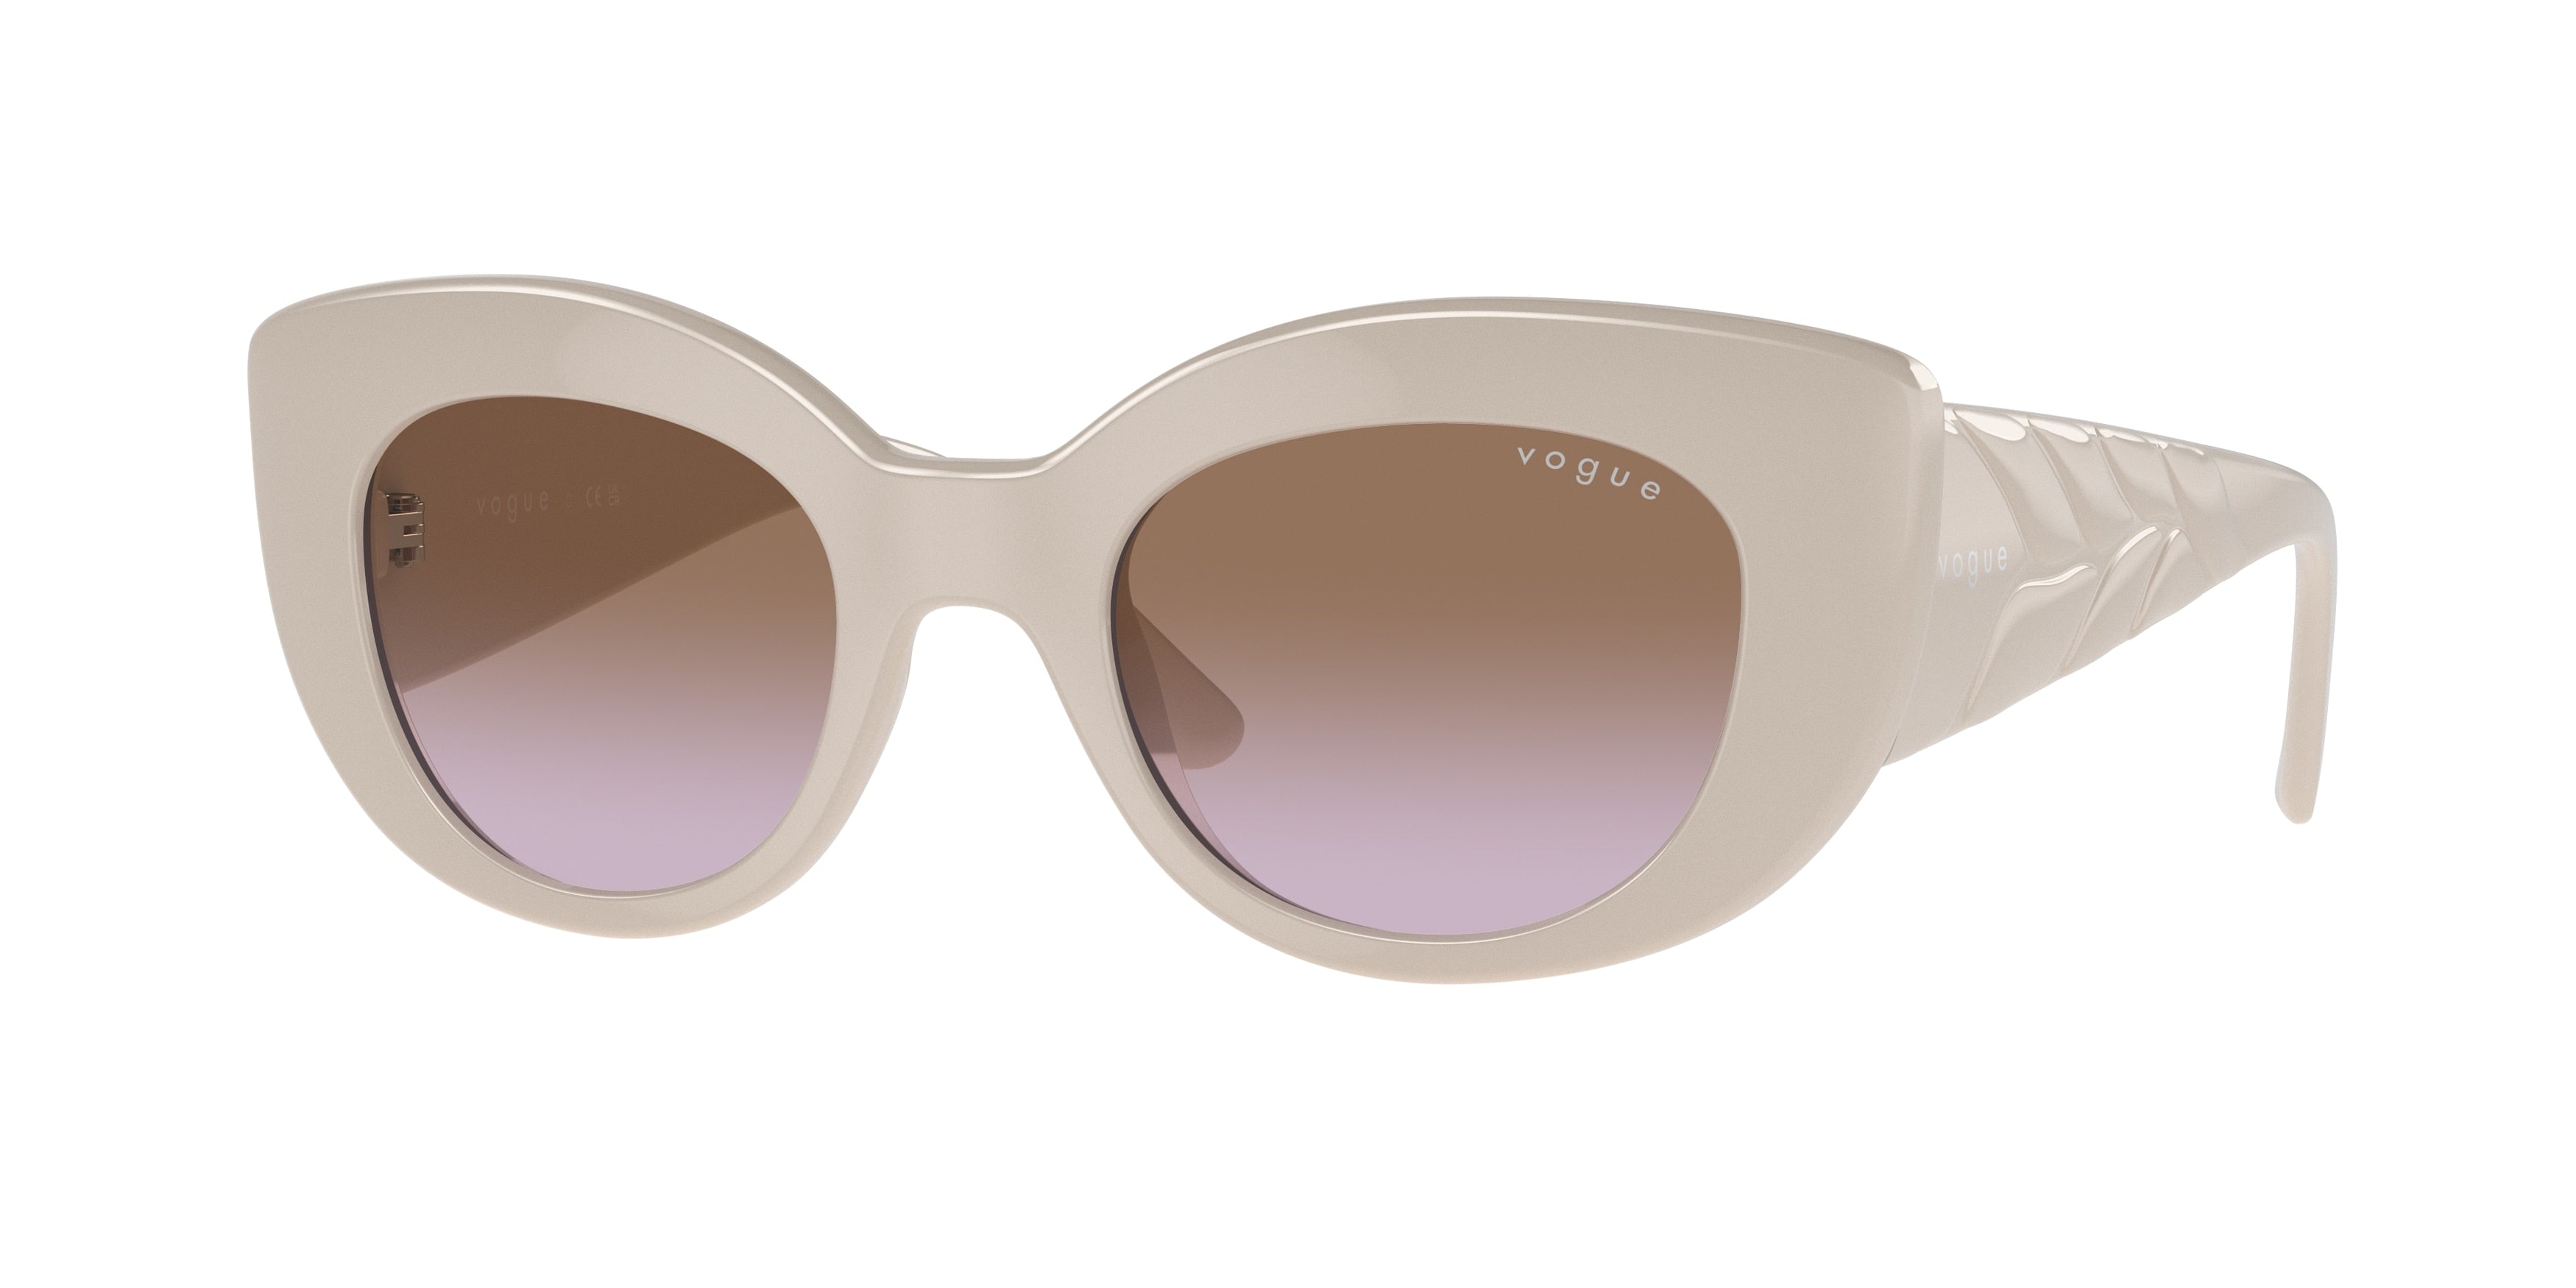 Vogue VO5480S Butterfly Sunglasses  304968-Full Light Grey 49-135-21 - Color Map Grey